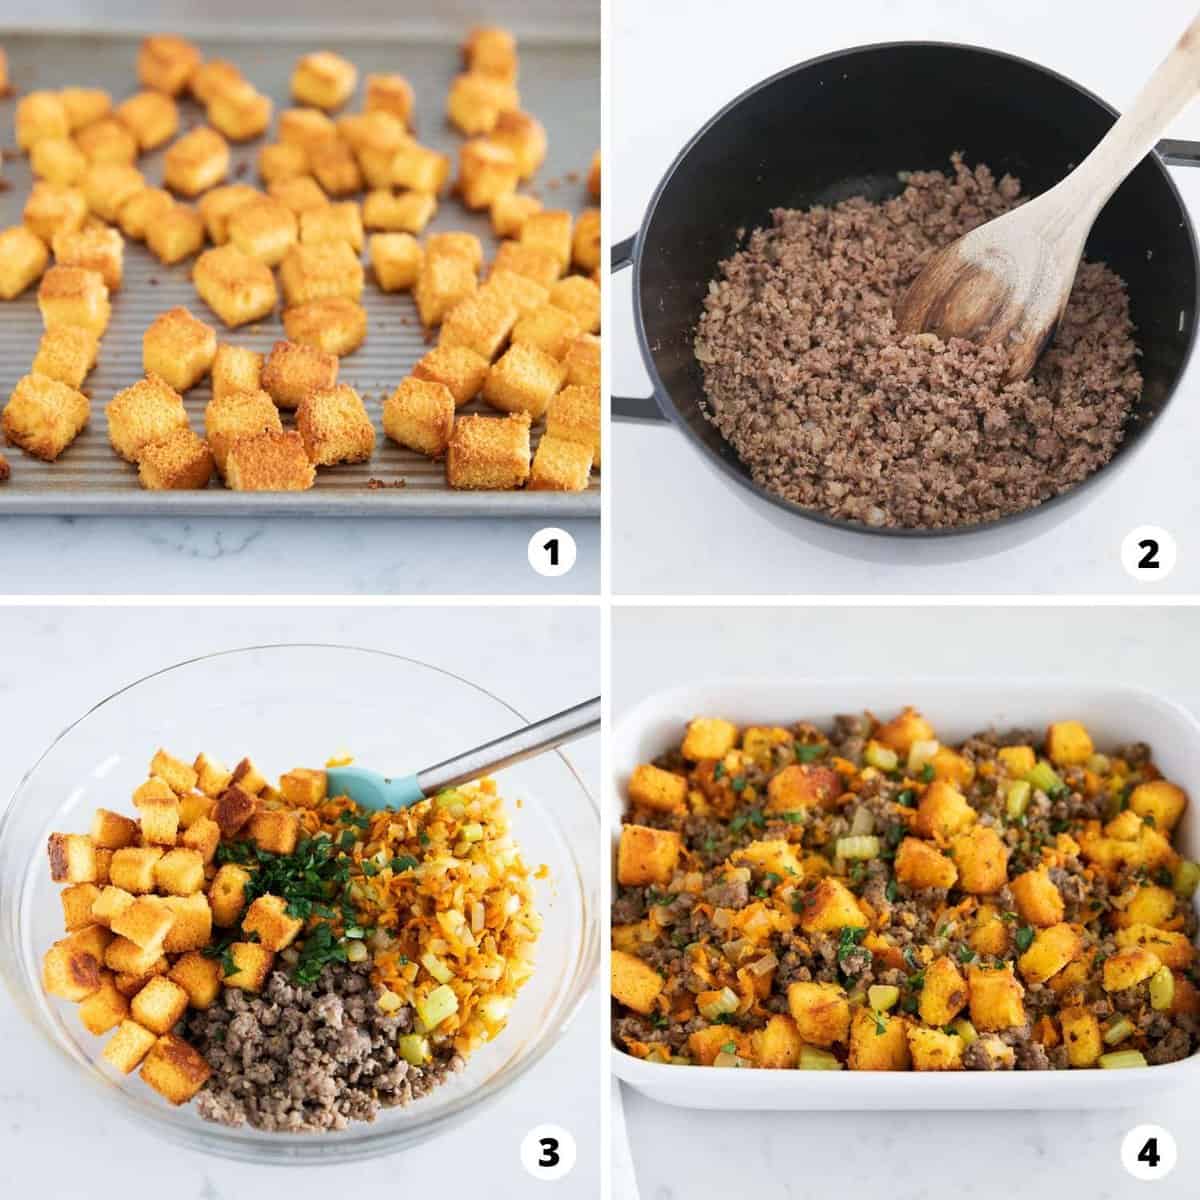 Showing how to make cornbread stuffing in a 4 step collage.